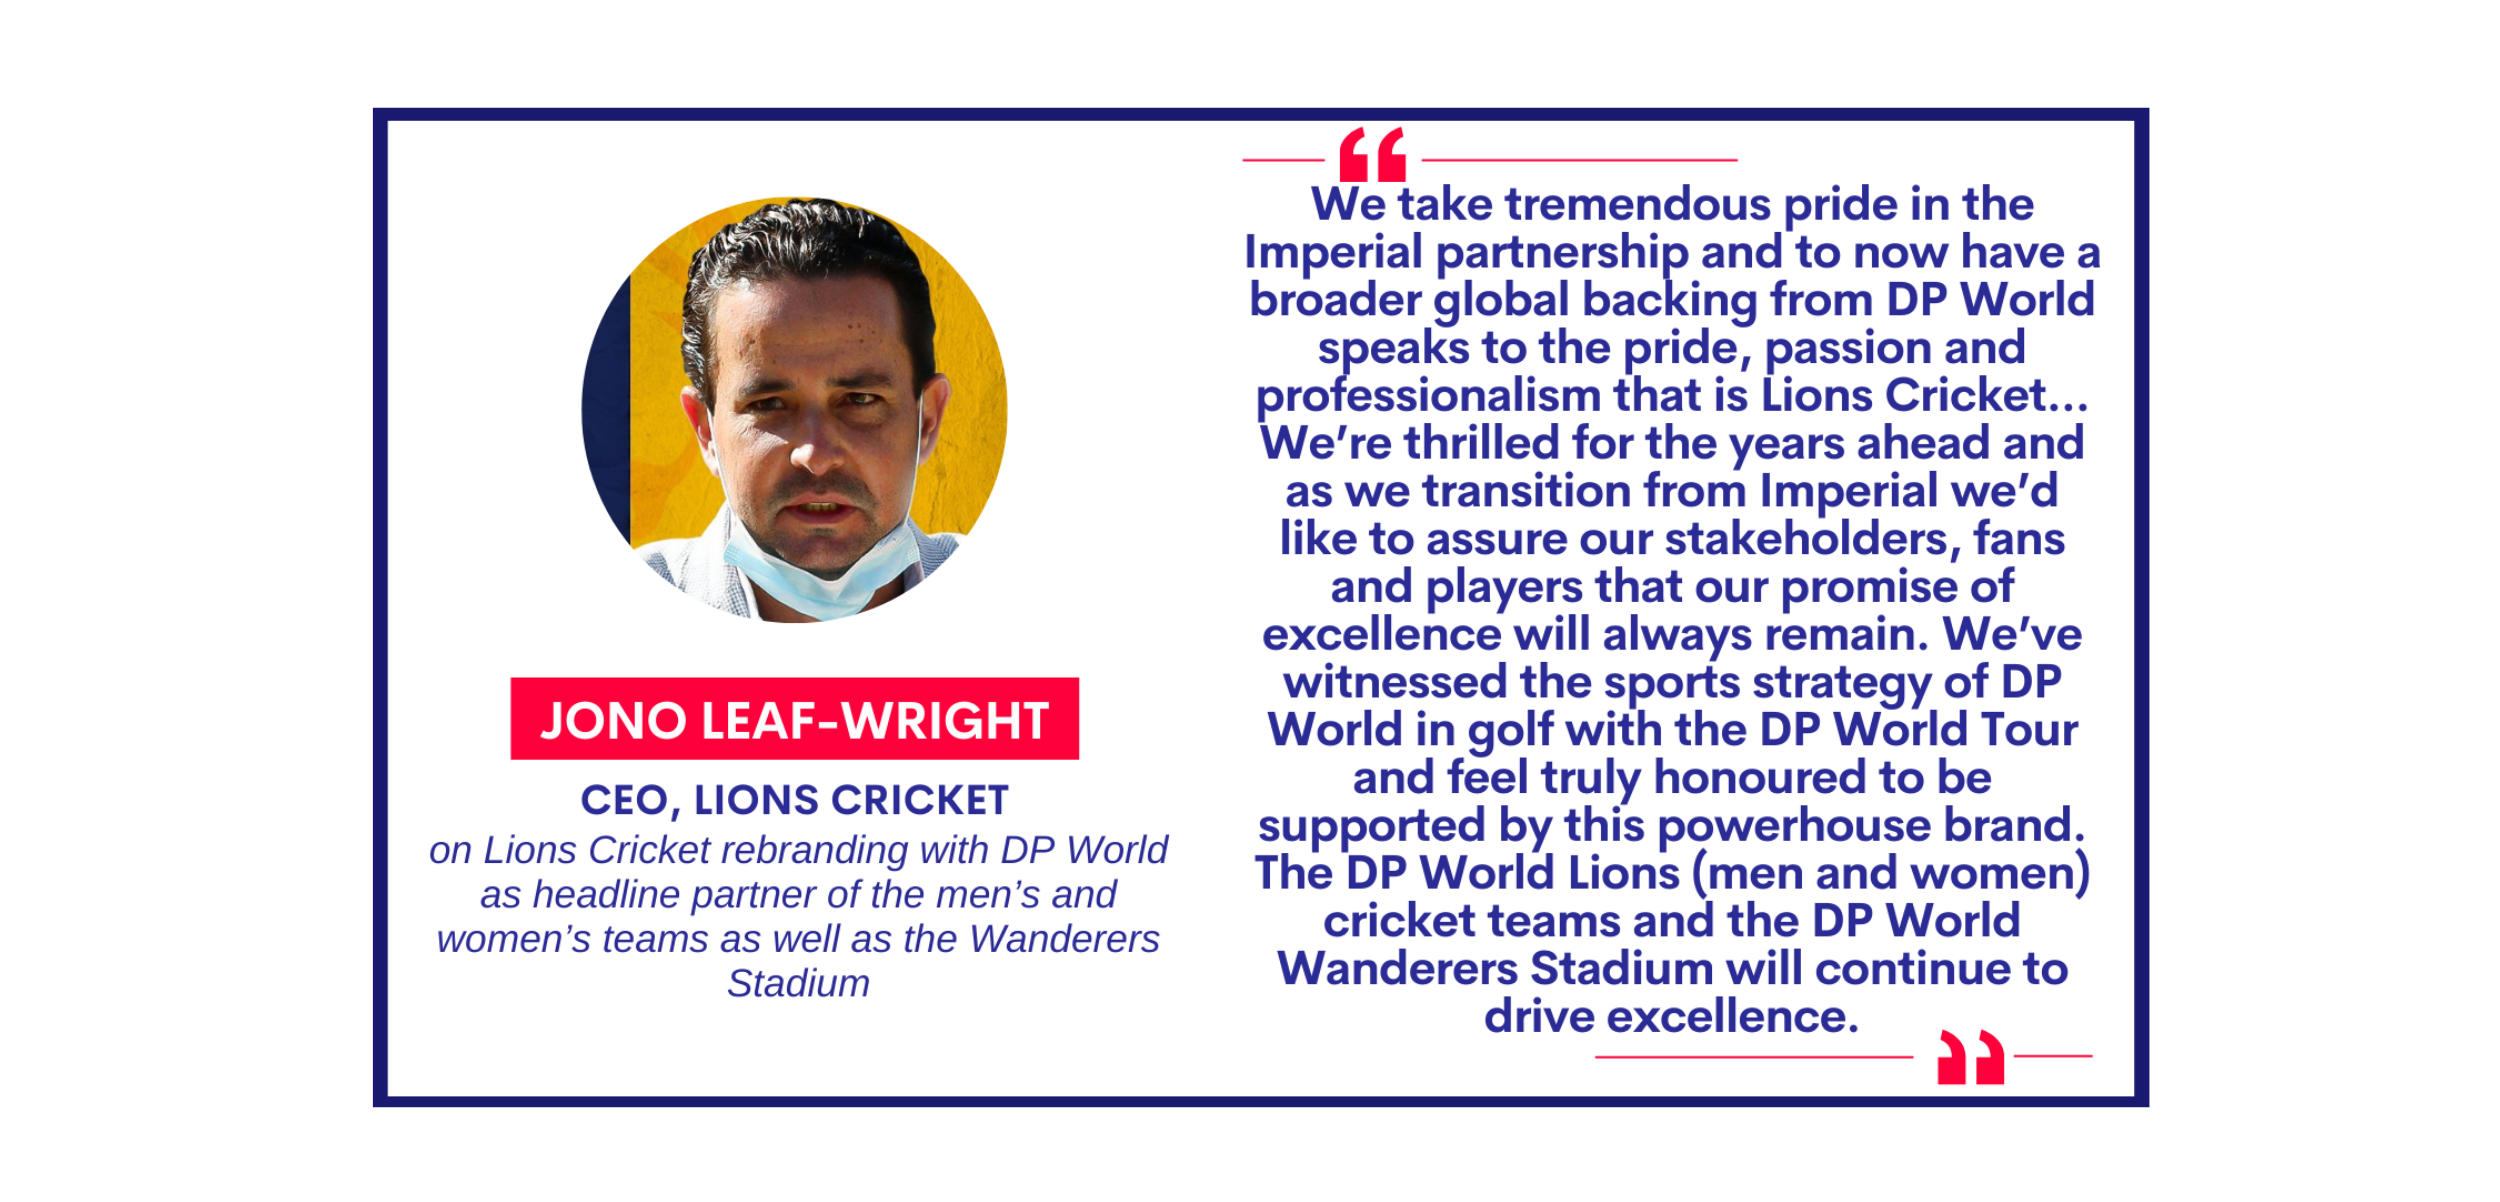 Jono Leaf-Wright, CEO, Lions Cricket on Lions Cricket rebranding with DP World as headline partner of the men’s and women’s teams as well as the Wanderers Stadium